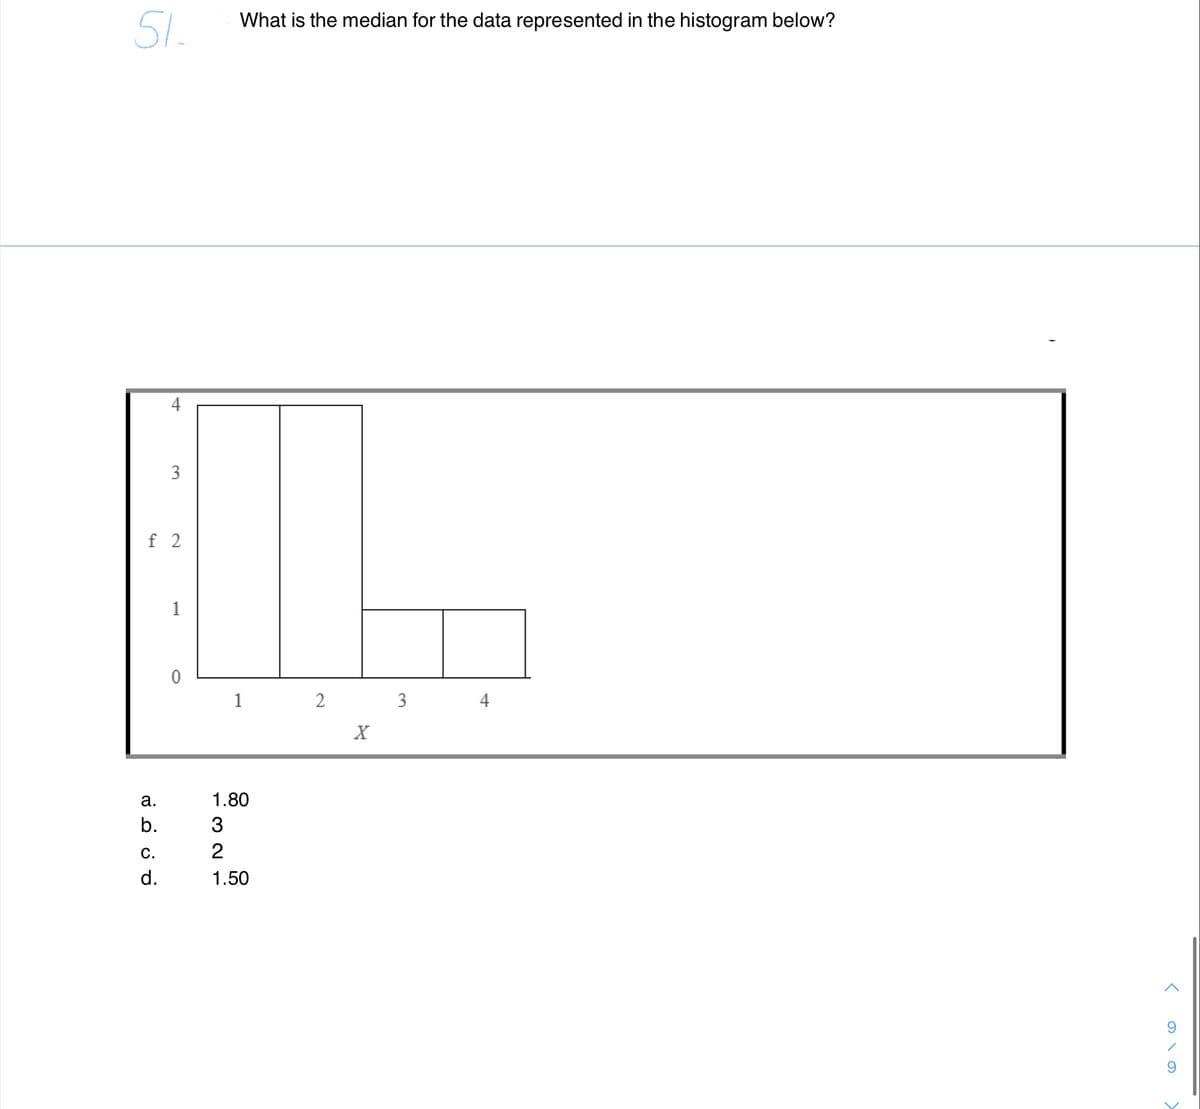 51.
What is the median for the data represented in the histogram below?
4
3
f 2
1
1
3
4
X
а.
1.80
b.
3
С.
2
d.
1.50
